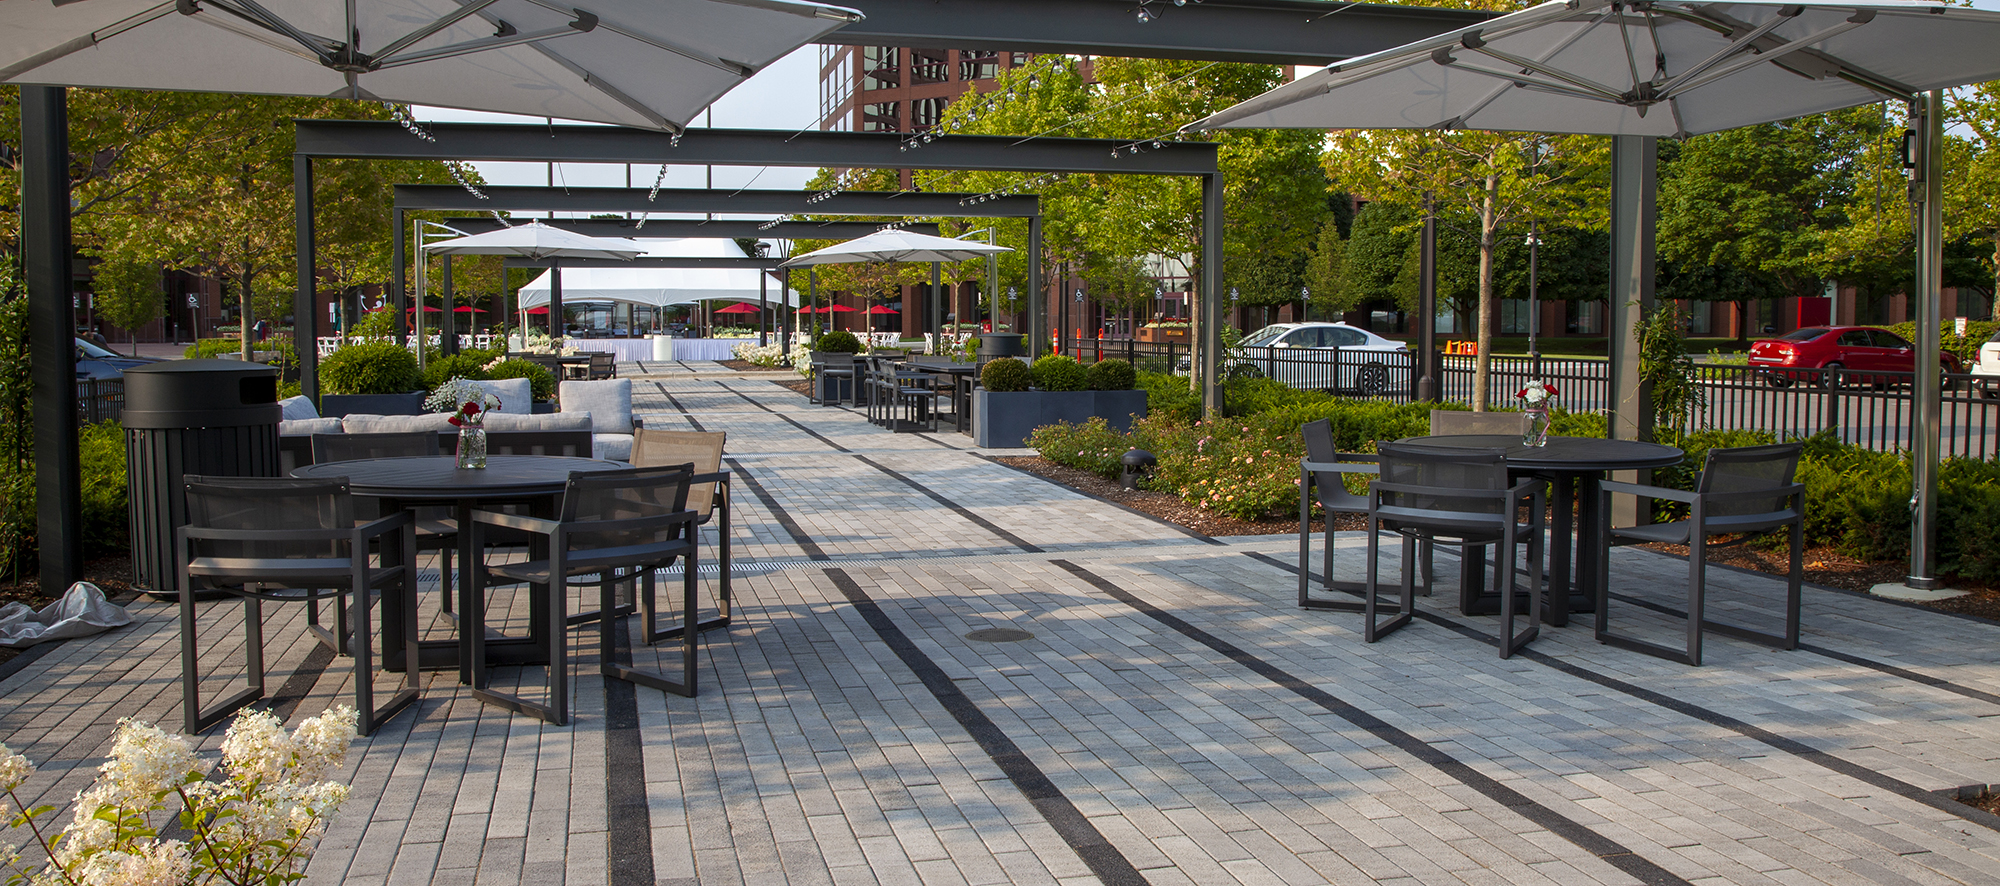 Two-toned Promenade Plank pavers delineate rows of walking spaces, with outdoor tables, chairs and umbrellas and landscaping on the sides.